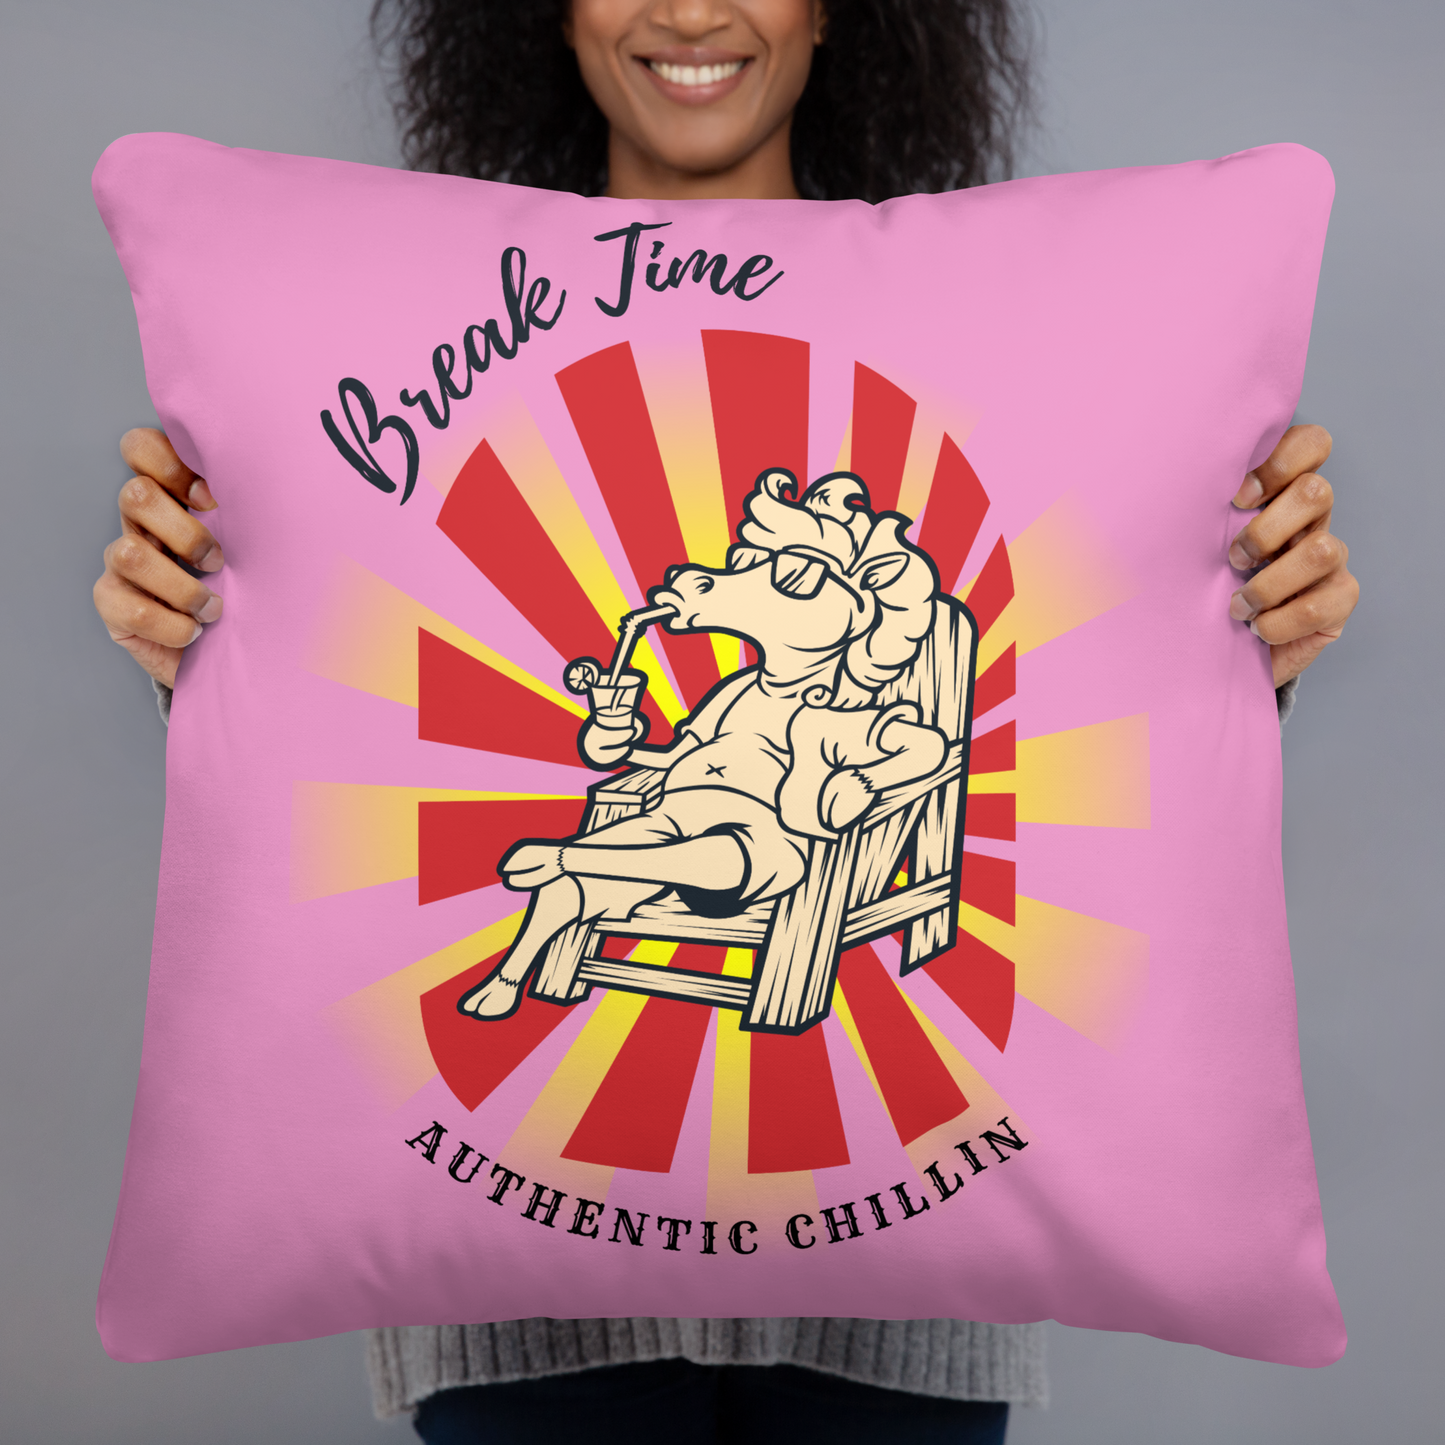 Hand Drawn Horse || Horse Square Throw Pillow - Design: "Break Time"; Static Design; Personalizable Text